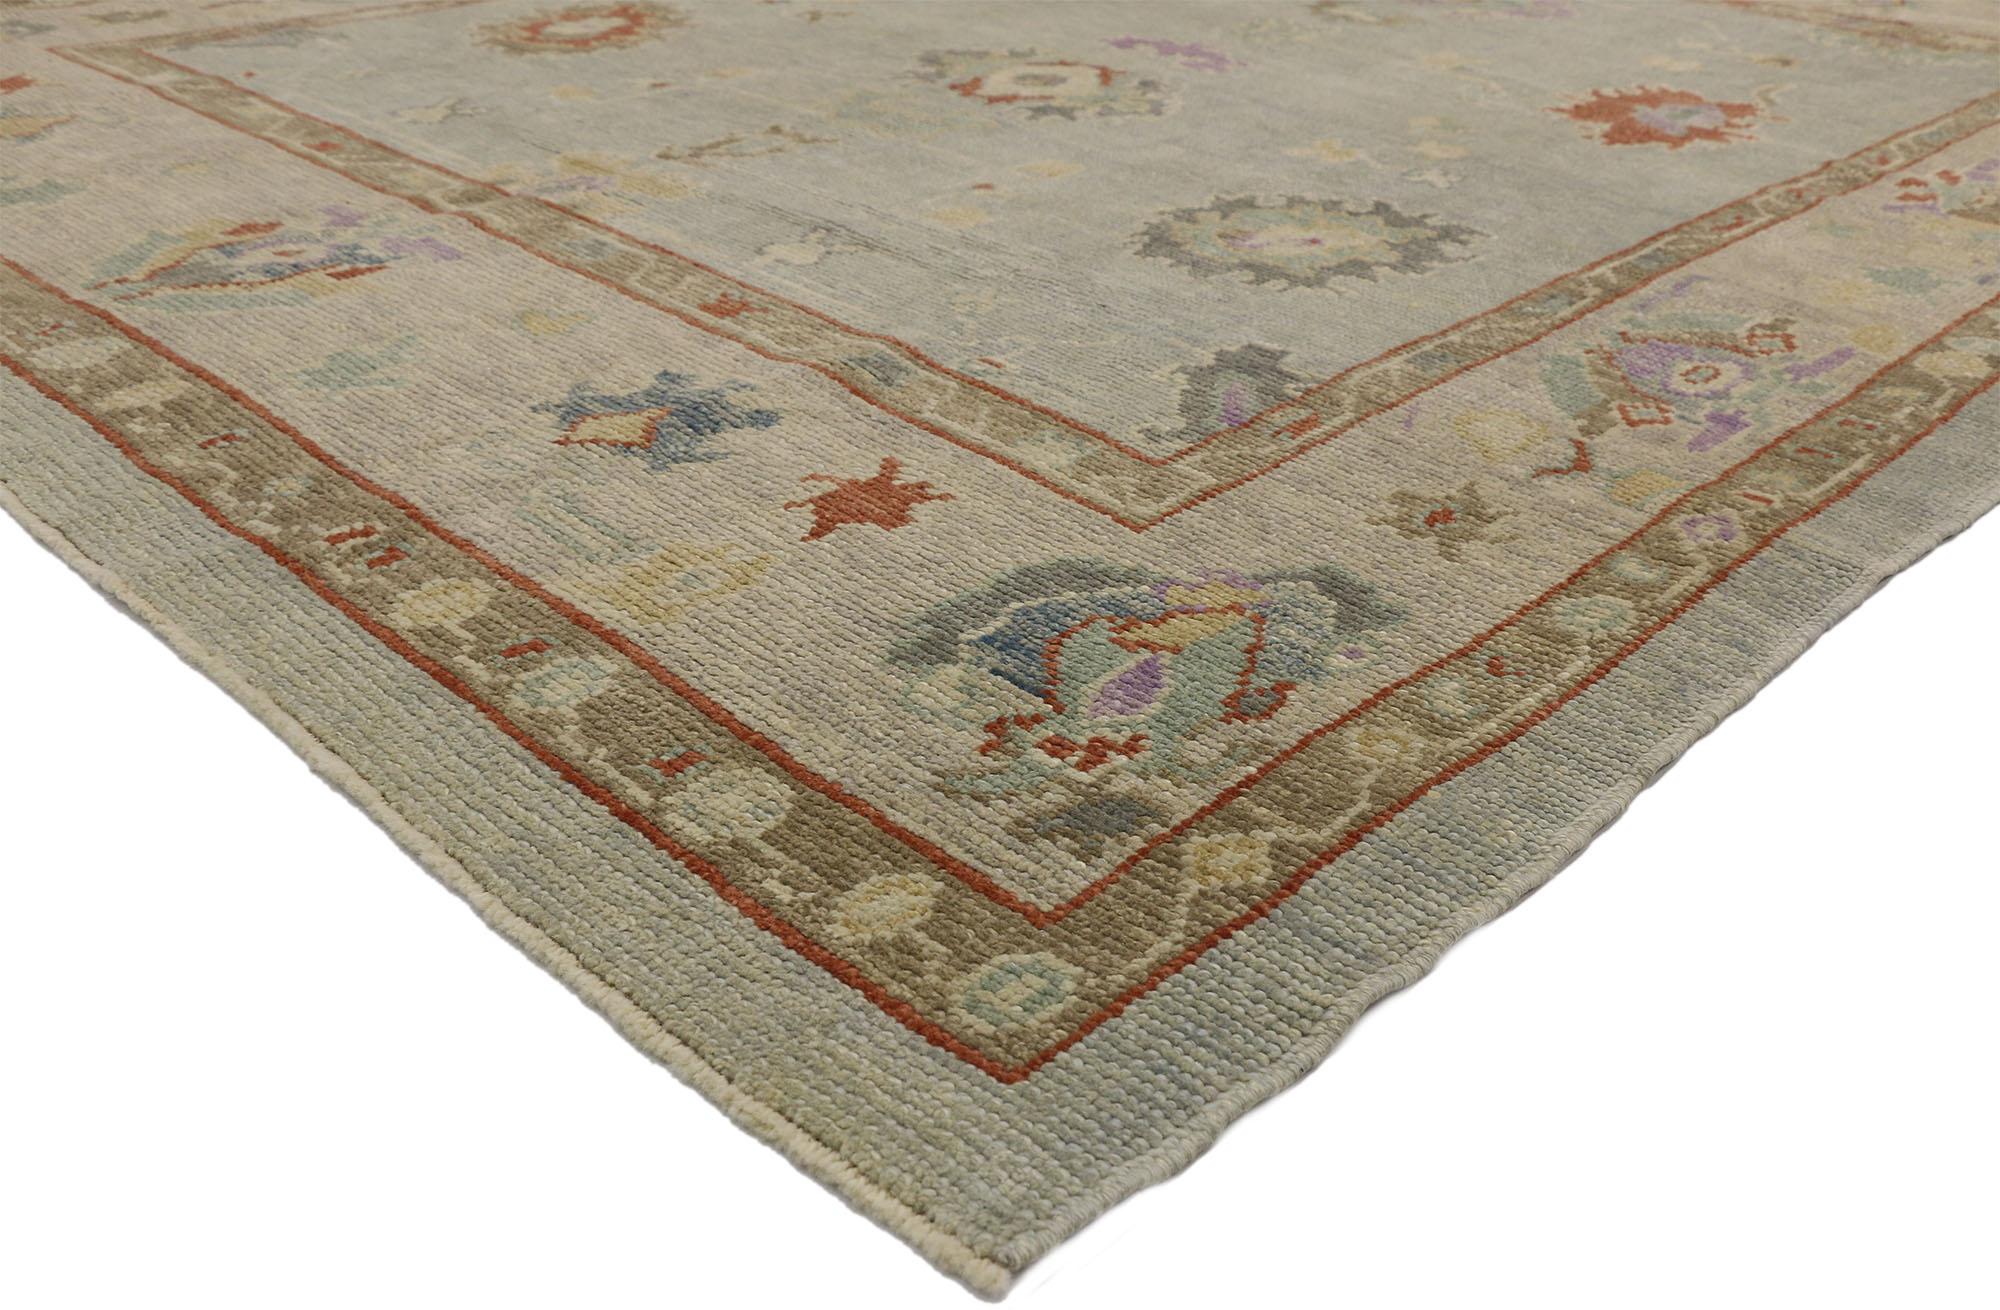 52525 New Contemporary Turkish Oushak rug with Transitional style. This hand knotted wool contemporary Turkish Oushak area rug features an all-over geometric pattern composed of Harshang-style motifs, delicate palmettes, thin rectilinear vines, and